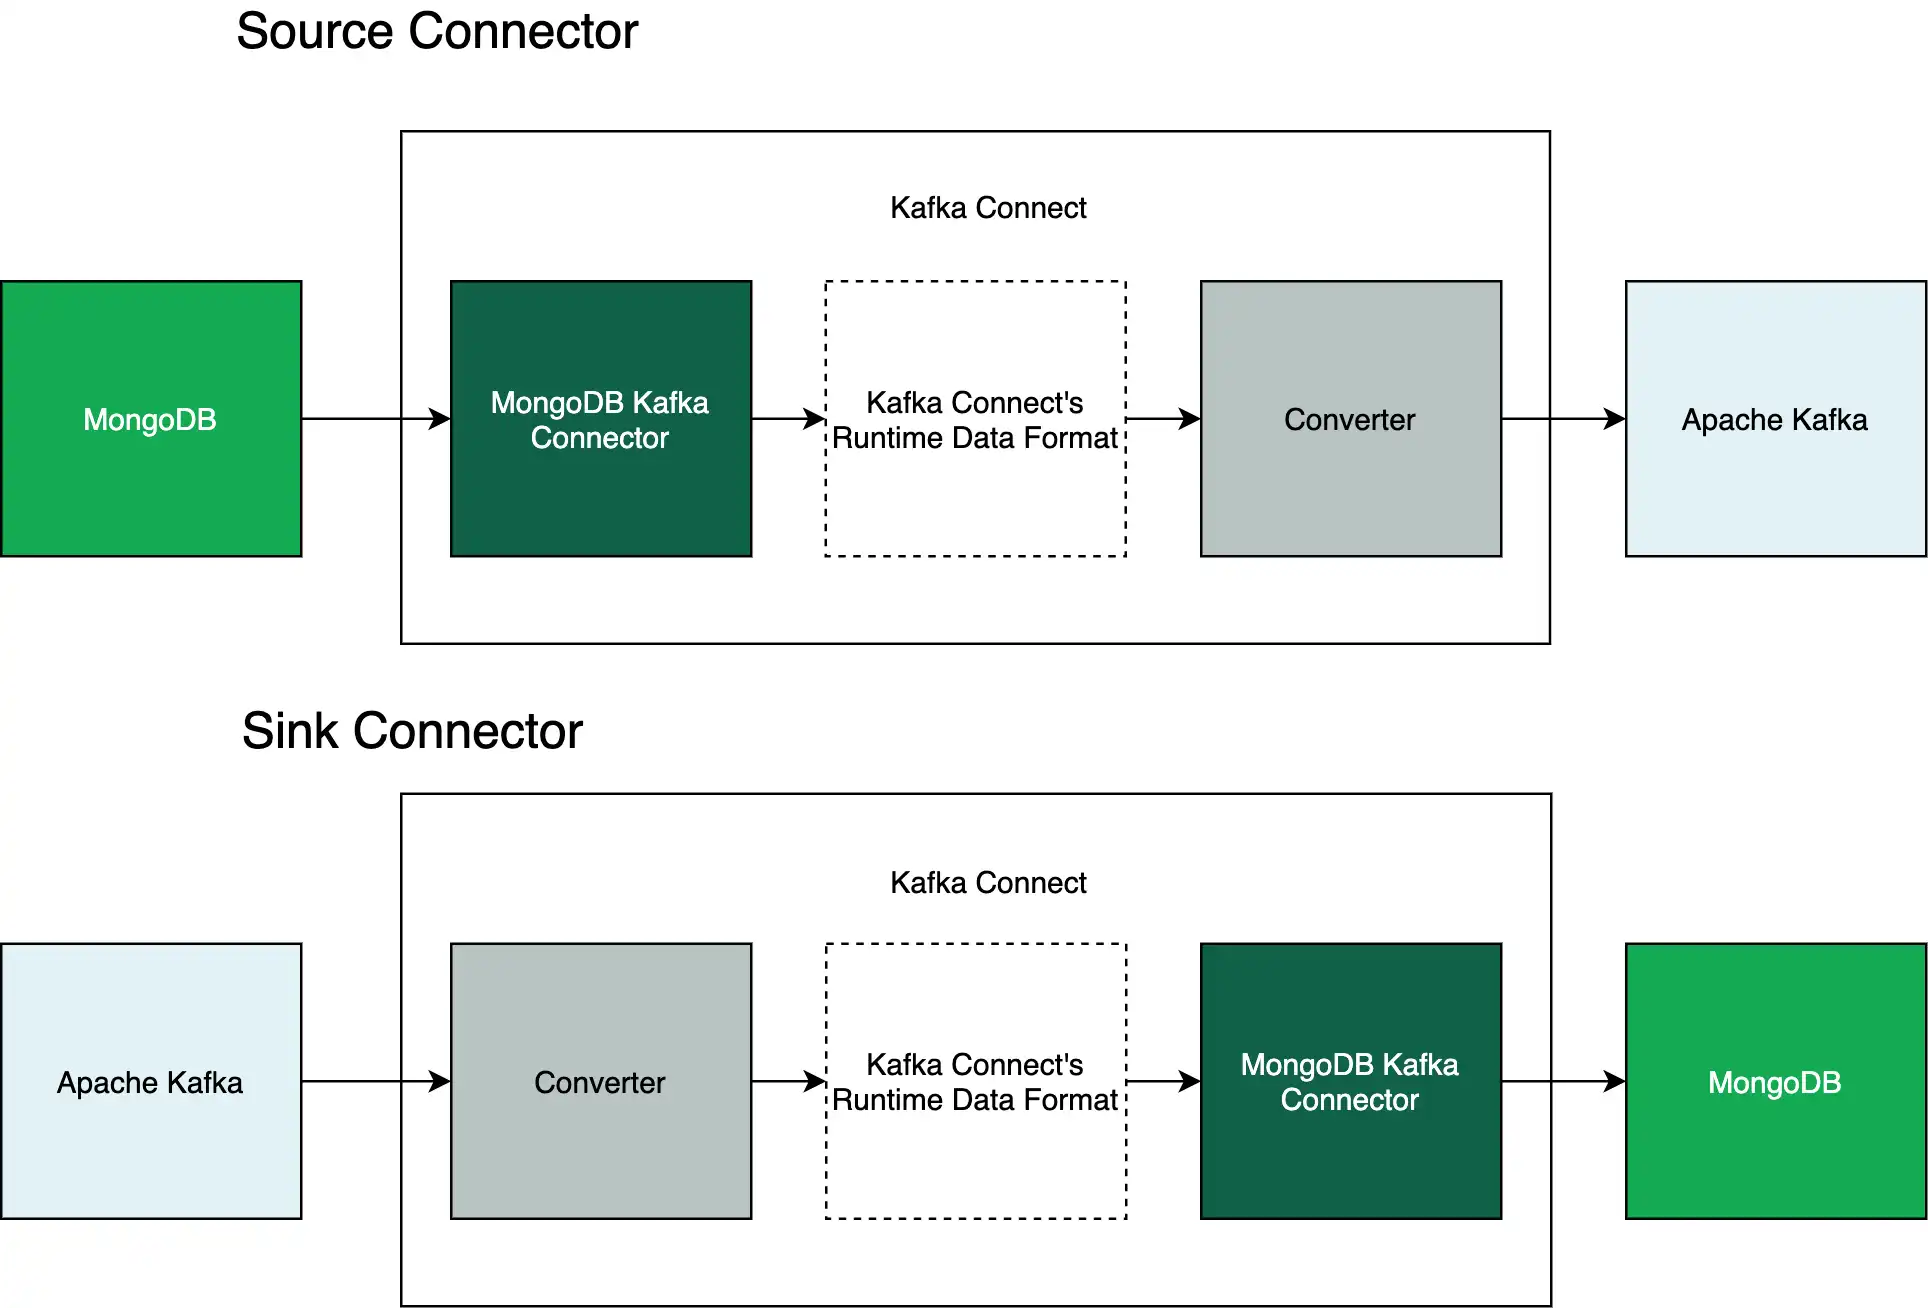 Diagram illustrating converters' role in Kafka Connect